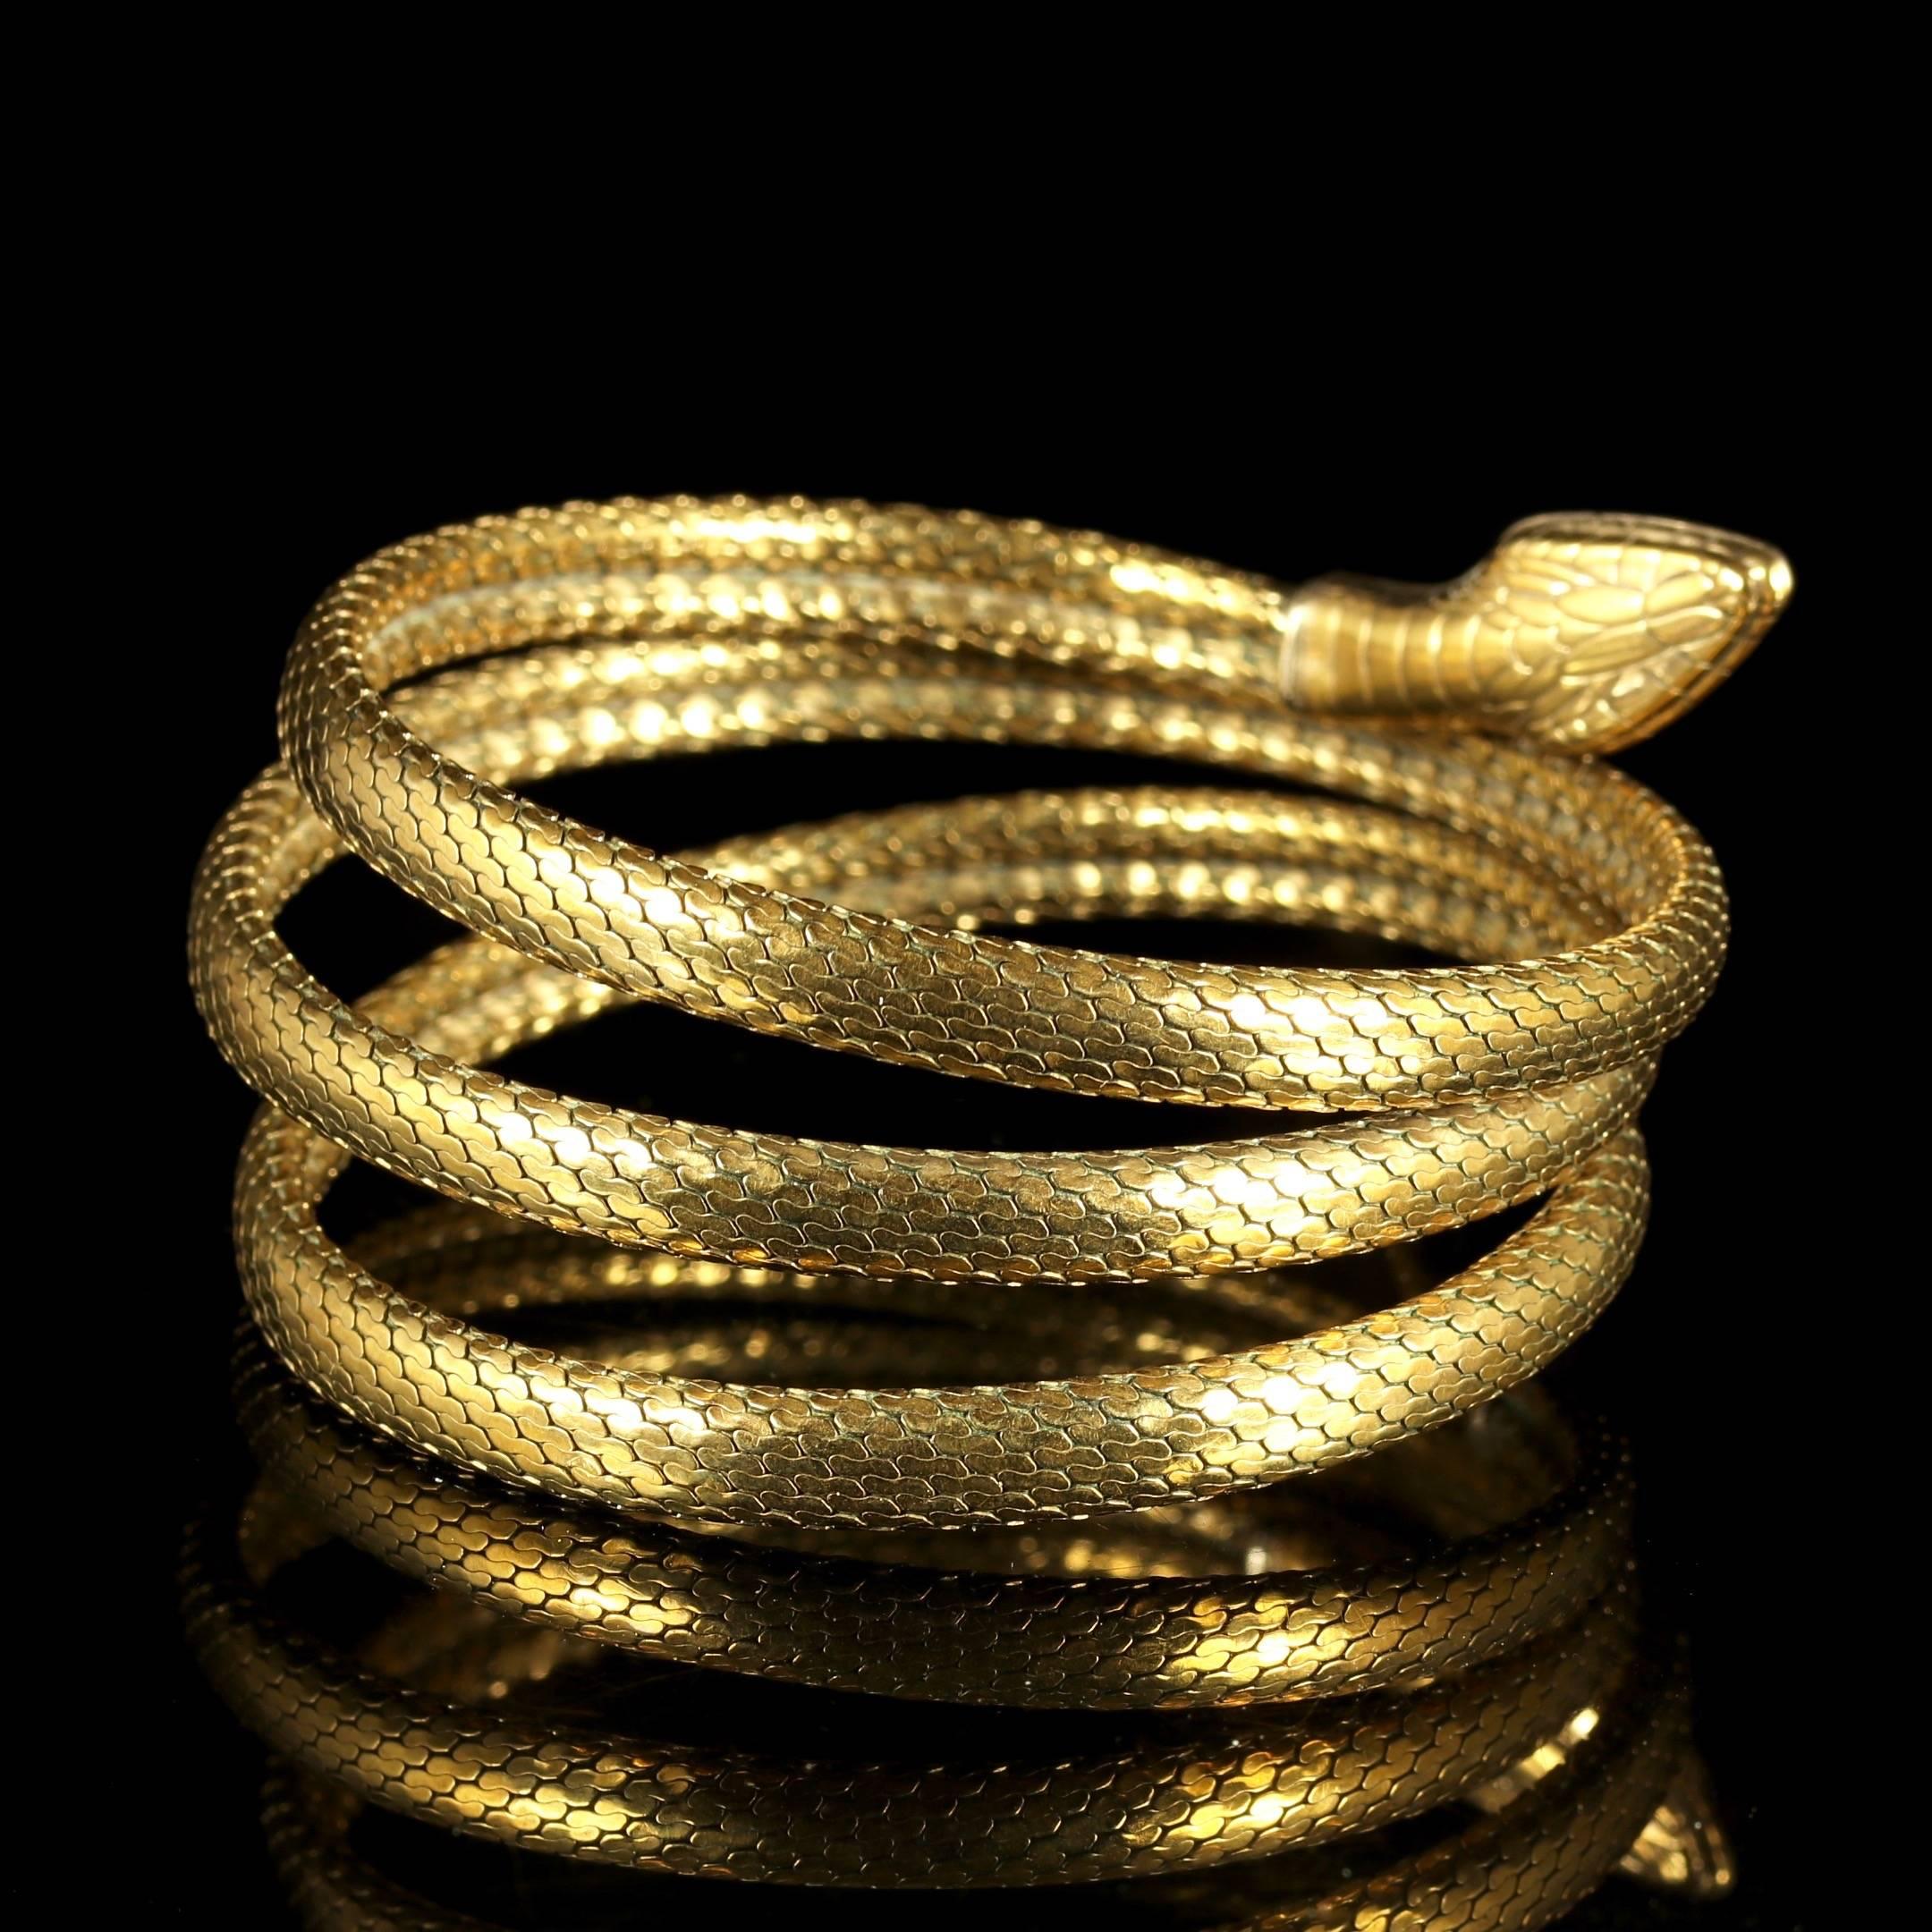 A fabulous Victorian snake bracelet that is set in 18ct Gold on Silver, Circa 1880.

Serpent jewellery became popular during the early years of Queen Victoria’s reign coinciding with the full flowering of the Romantic Movement. Serpents represent